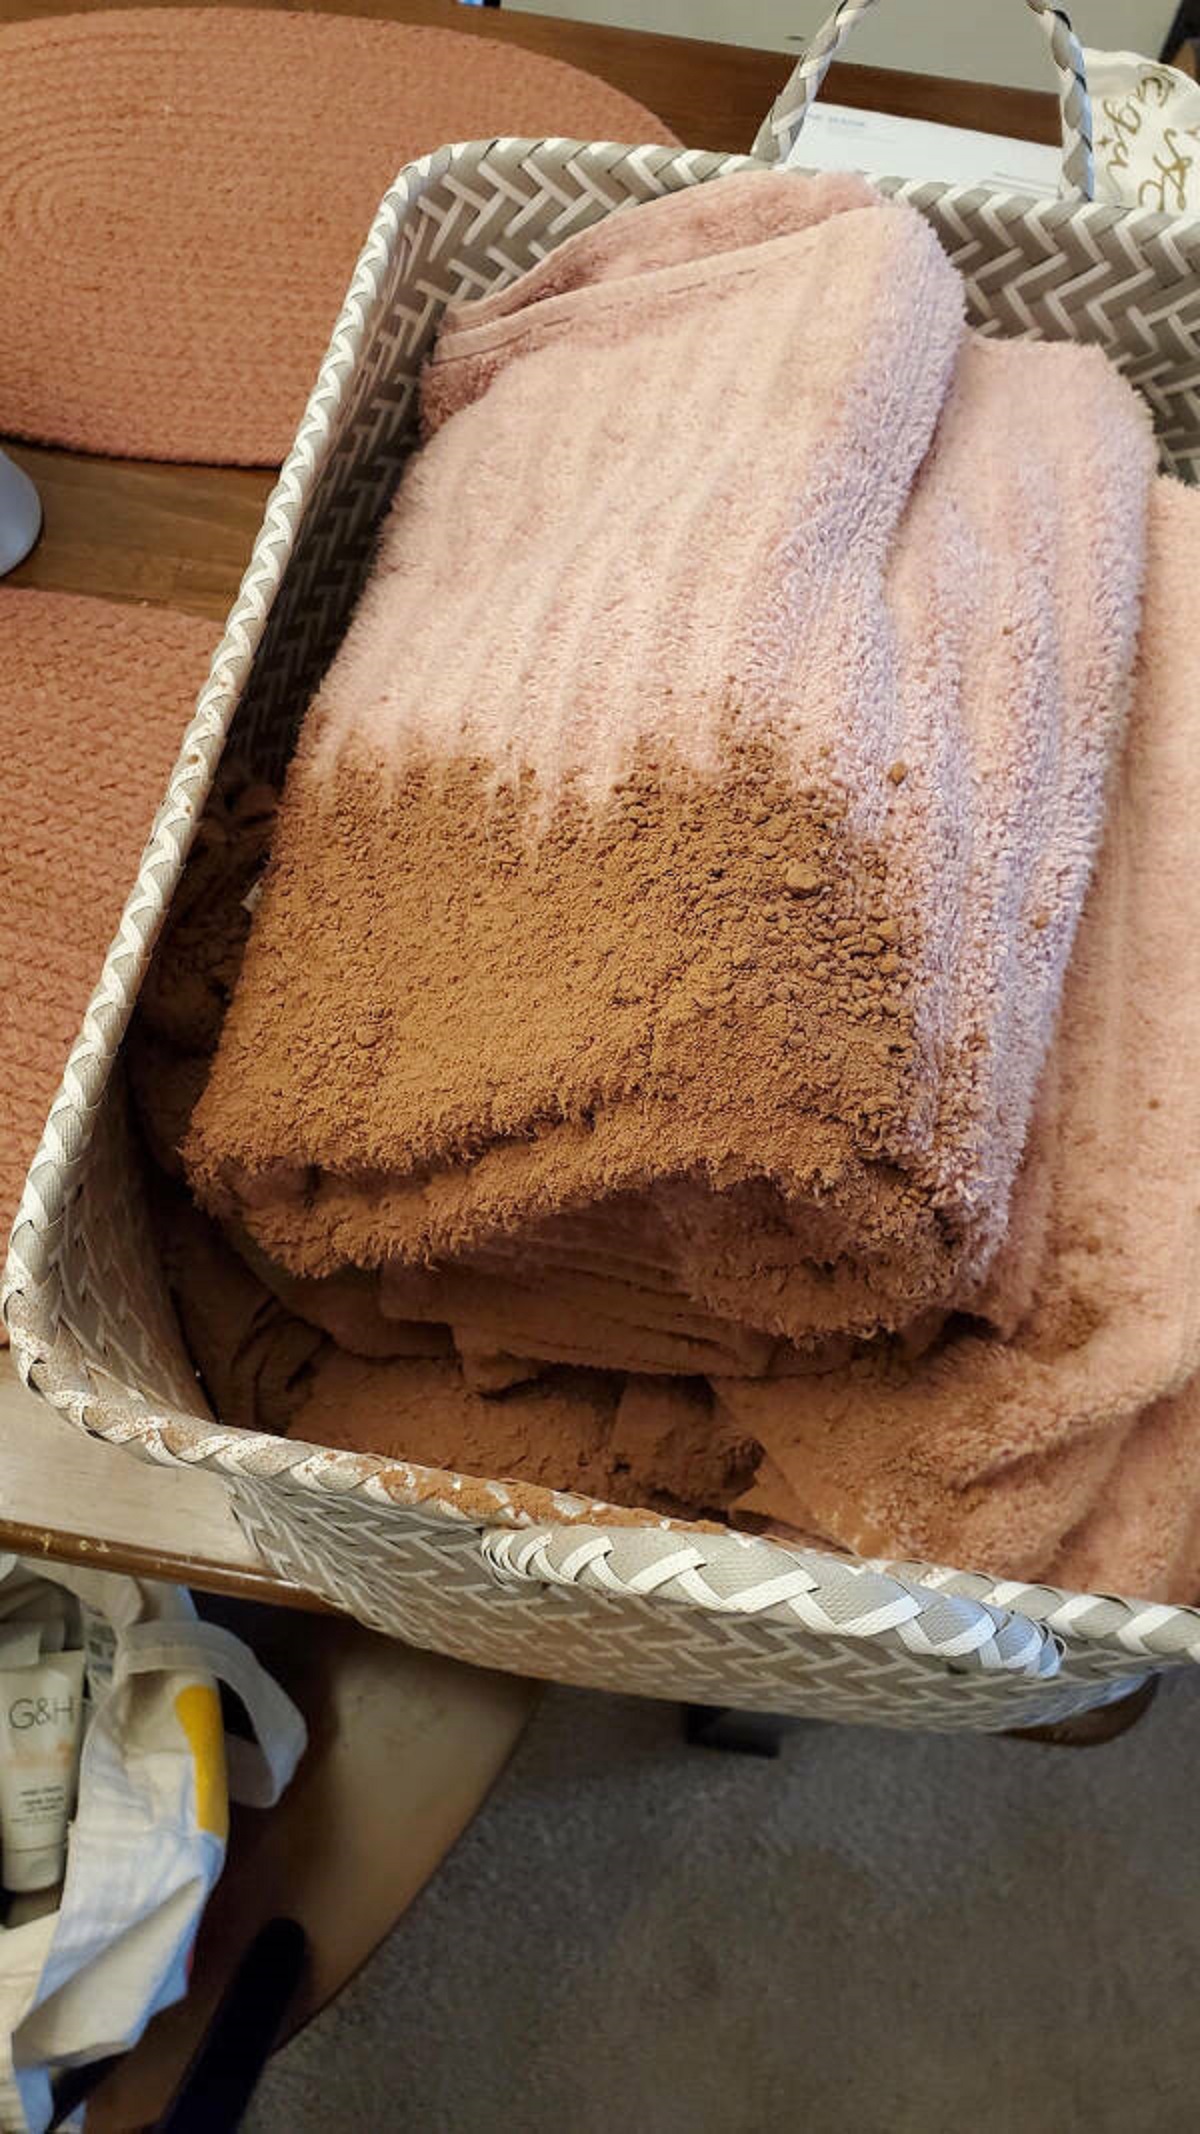 “Spilled Cocoa Powder all over my roommates sheets.”